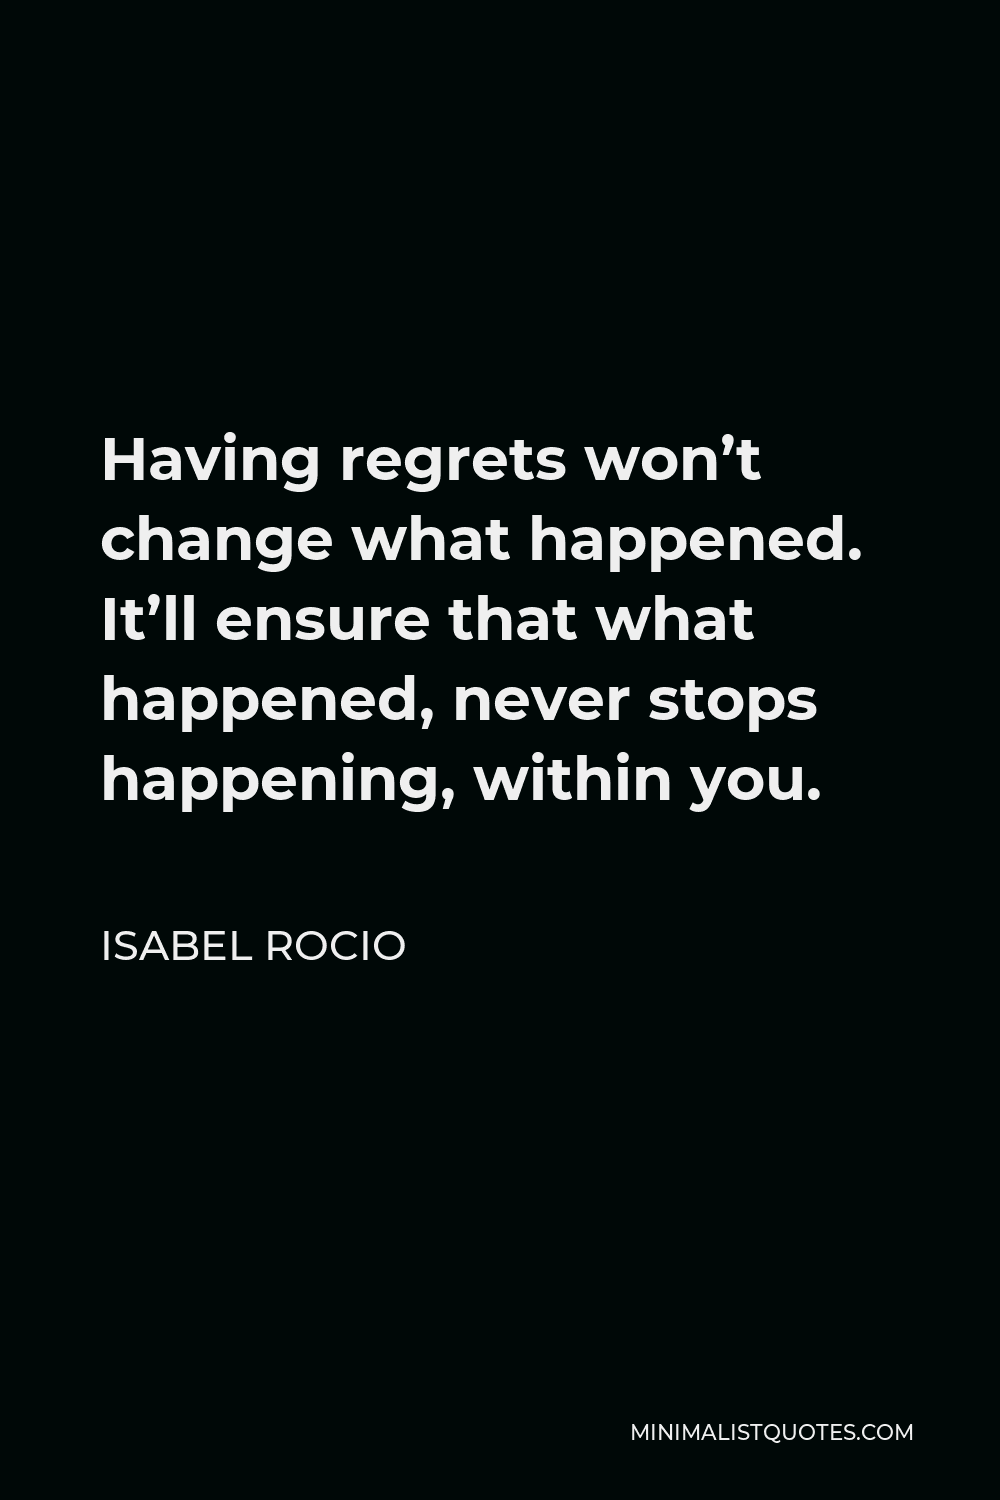 Isabel Rocio Quote - Having regrets won’t change what happened. It’ll ensure that what happened, never stops happening, within you.